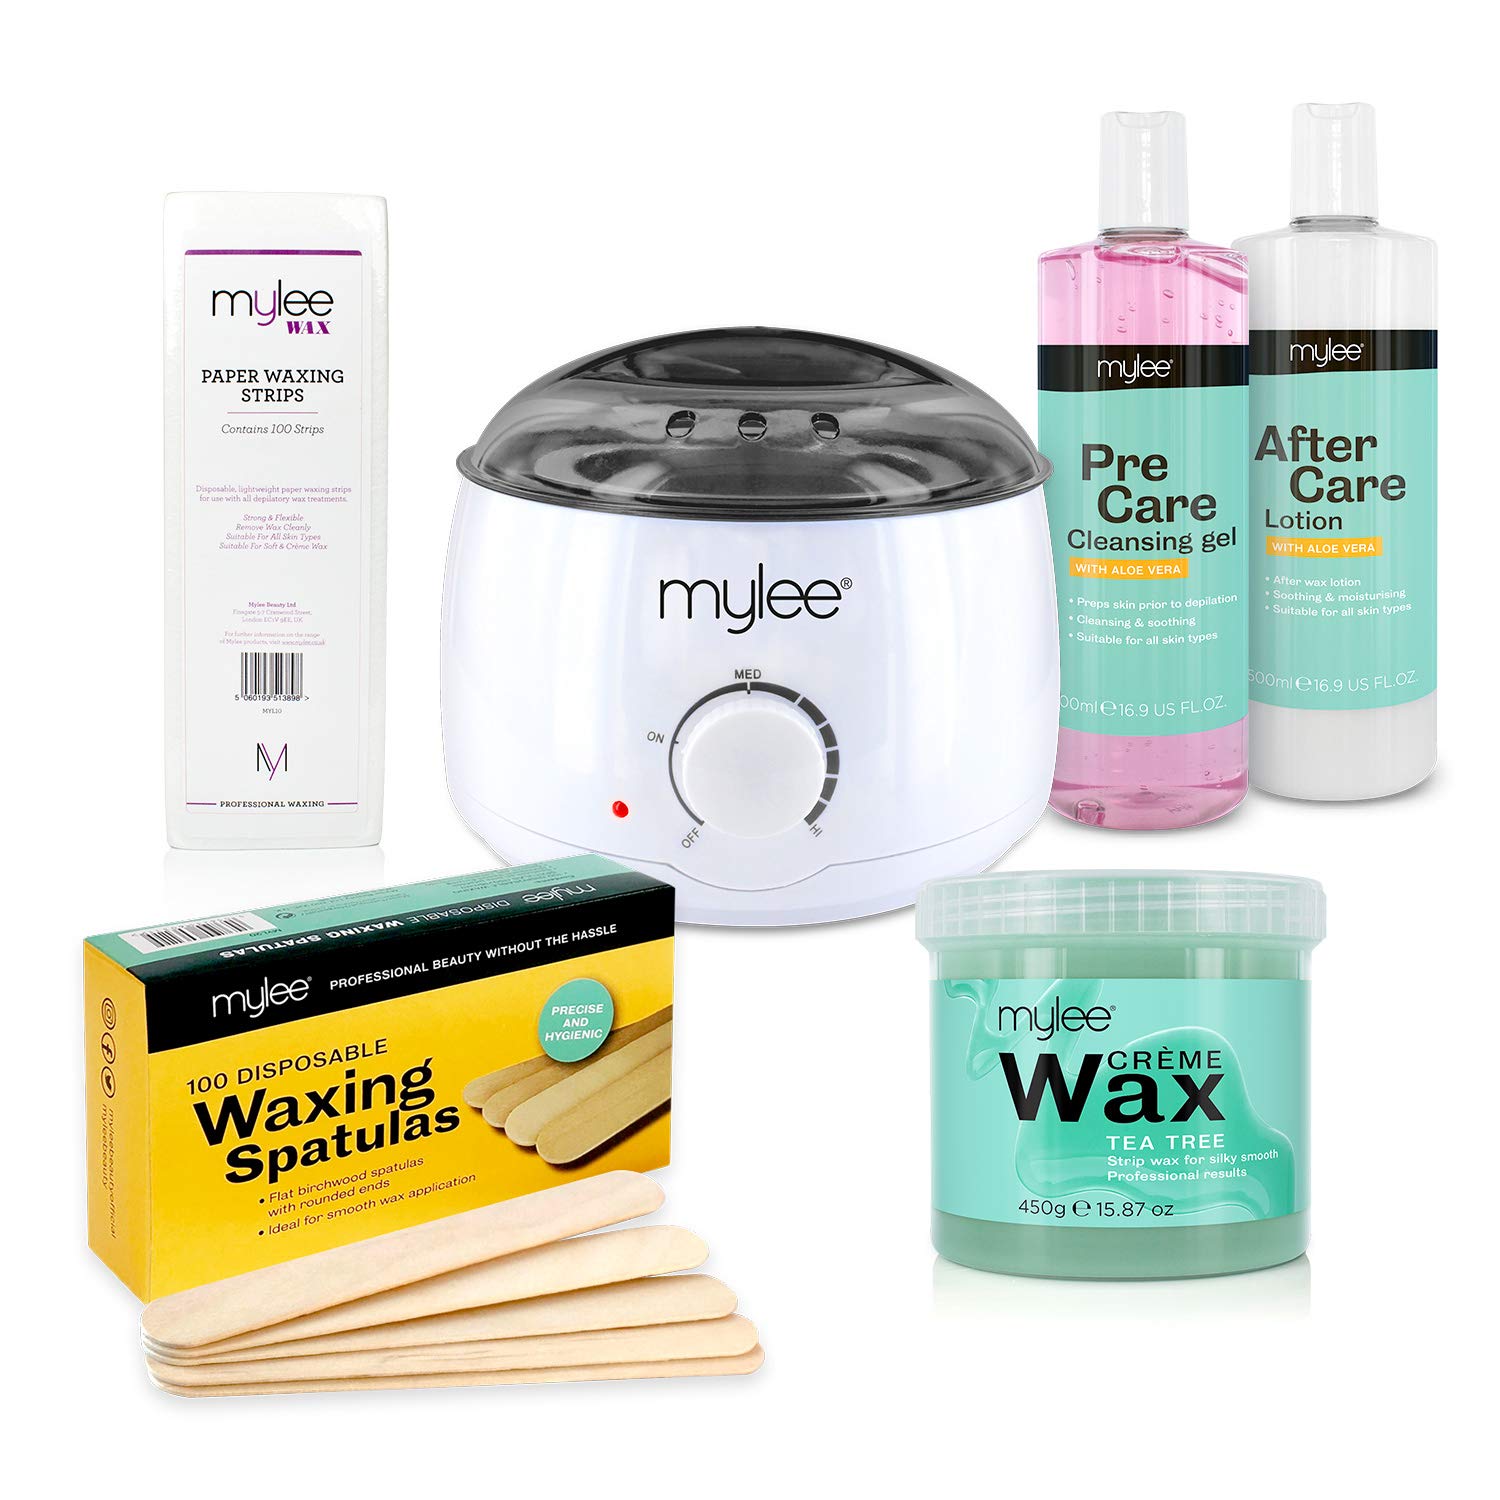 Mylee Complete Waxing Kit, Includes Salon Quality Wax Heater, Soft Cream Wax, Waxing Strips, Spatulas and Mylee Pre & After Care Lotion (Kit + Tea Tree Wax)